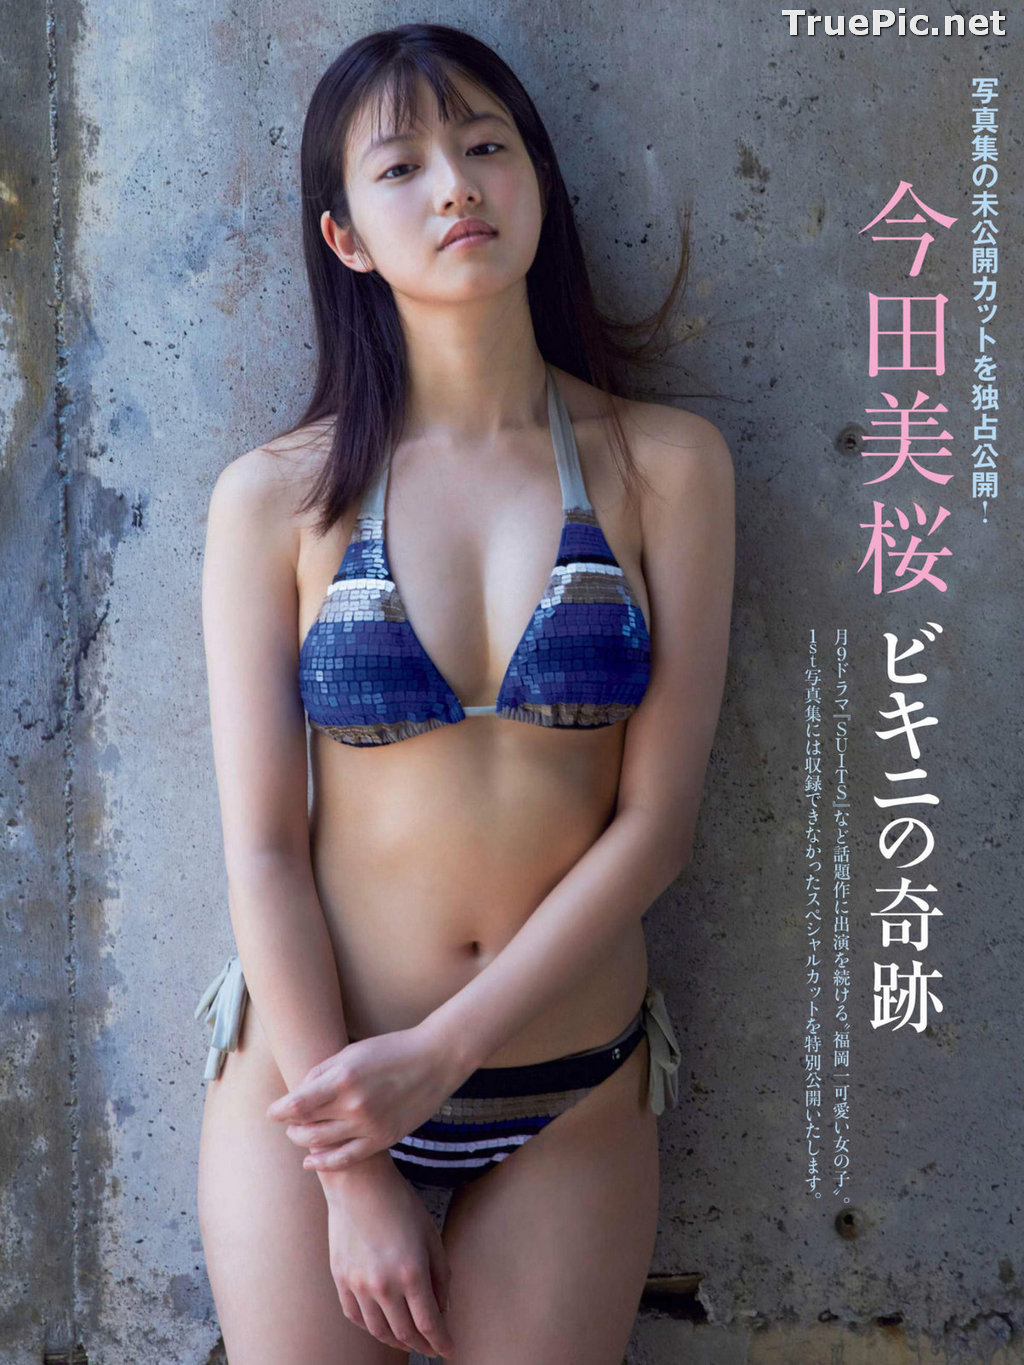 Image Japanese Actress and Model - Mio Imada (今田美櫻) - Sexy Picture Collection 2020 - TruePic.net - Picture-284